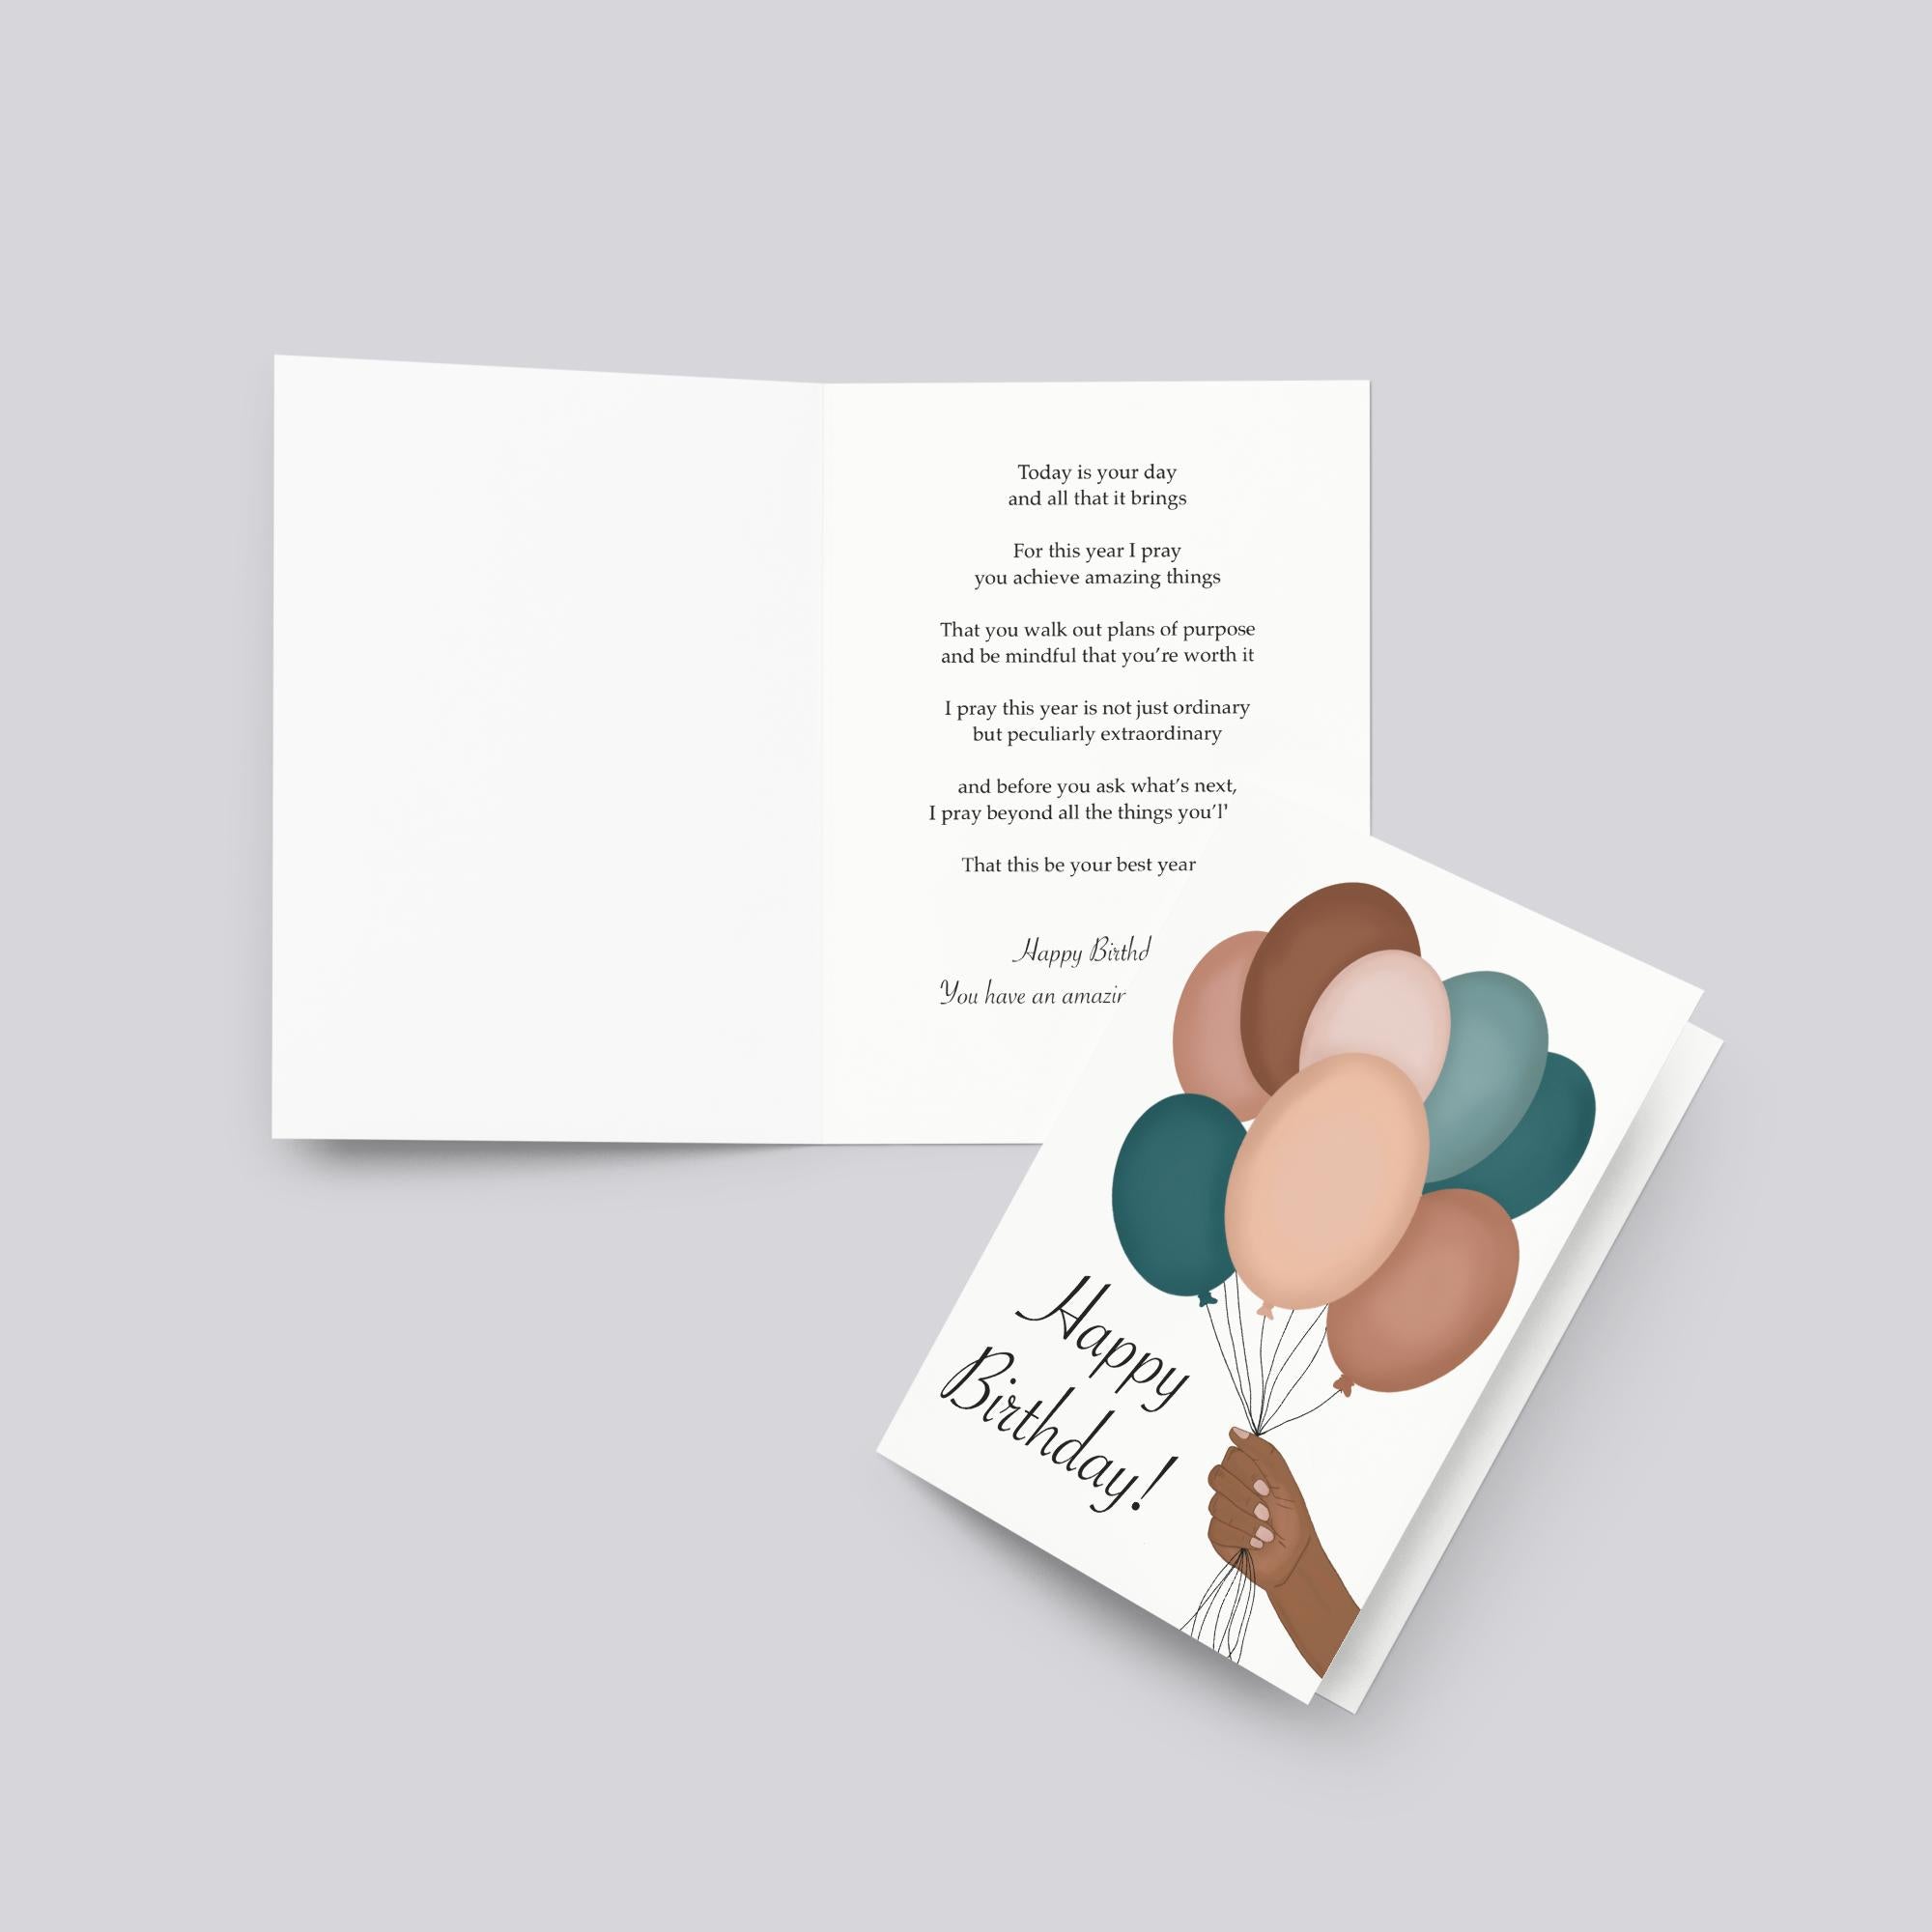 Blessings And Balloons! Birthday Greeting Card